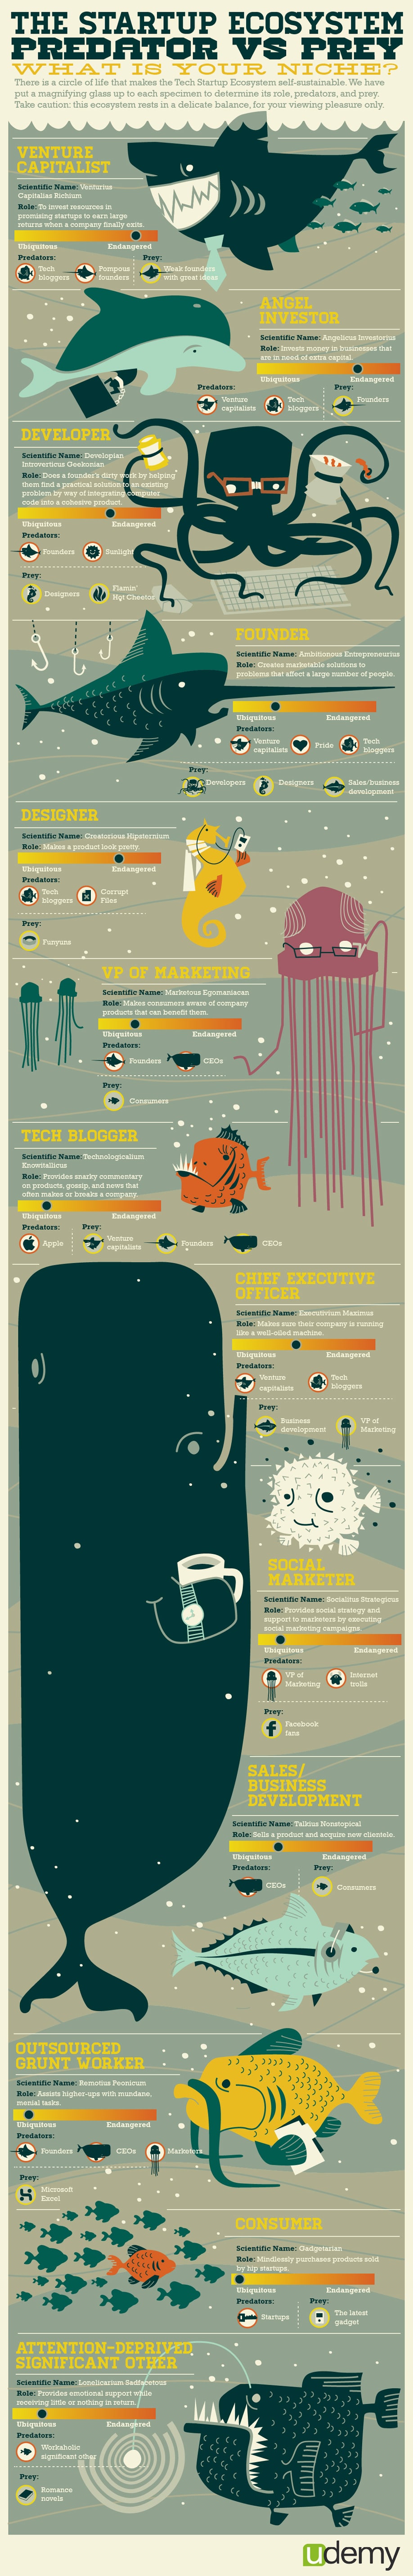 The Startup Ecosystem: Tech Roles Compared [Infographic]